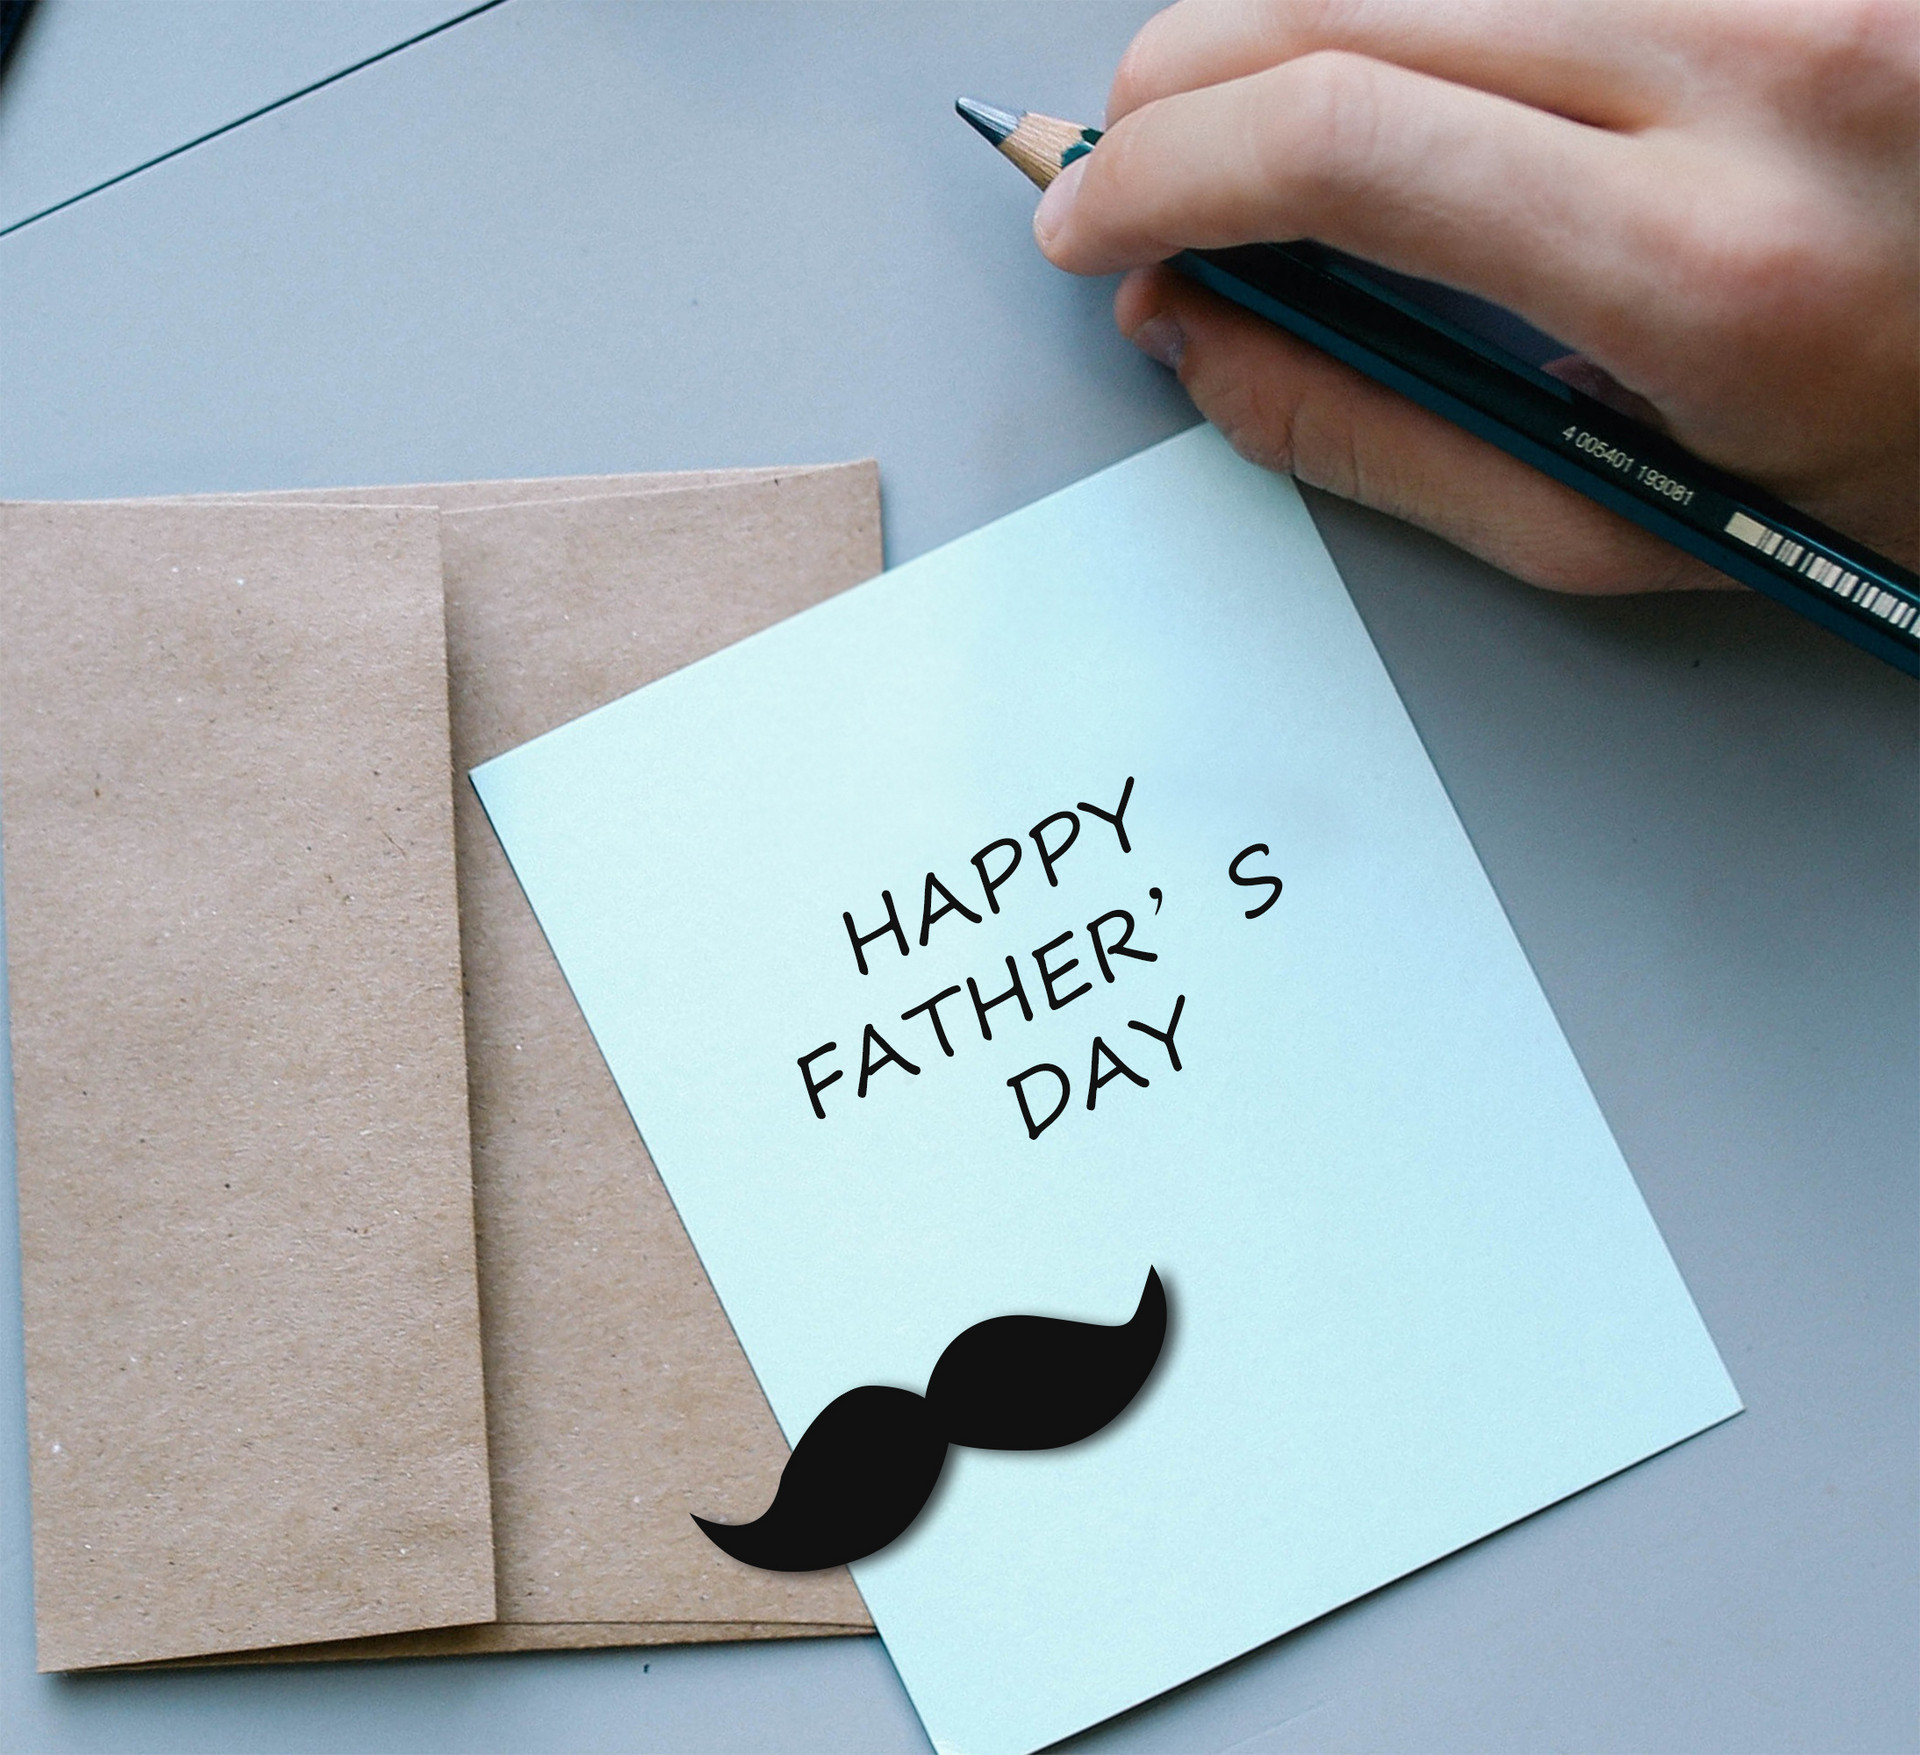 Kindergarten Father’s Day handmade greeting card production_Kindergarten Father’s Day greeting card production_Kindergarten Father’s Day greeting card simple drawing